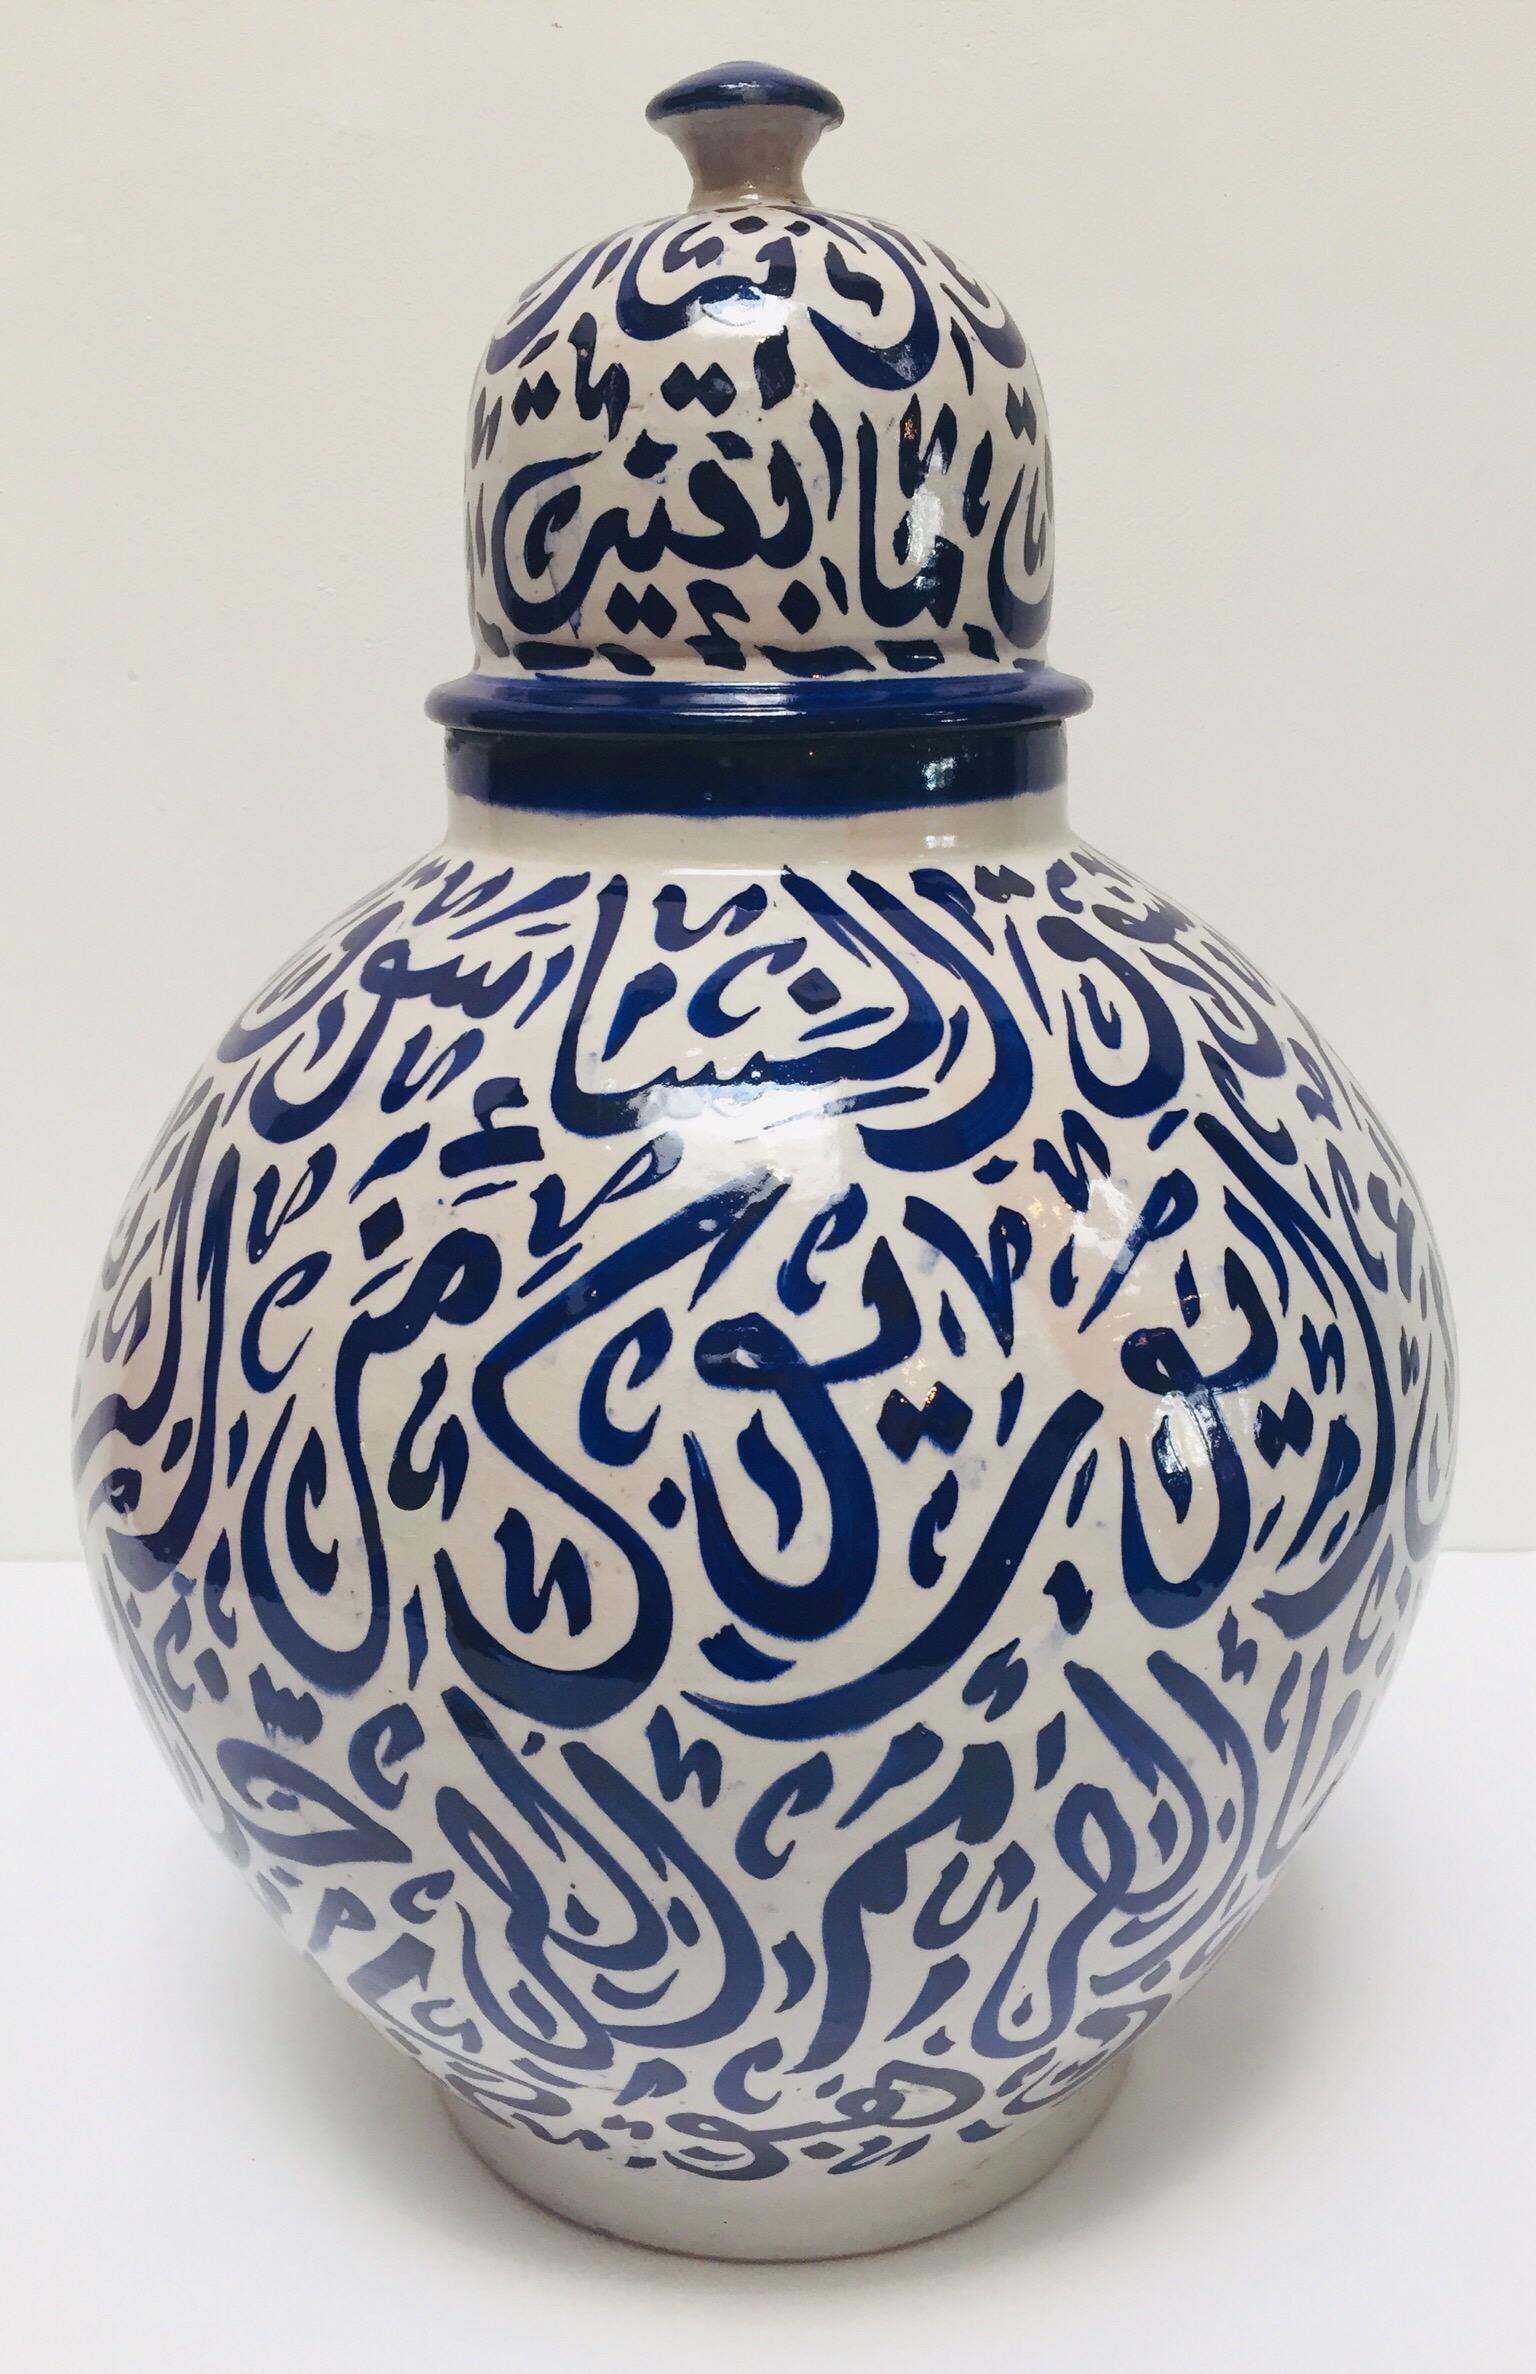 Large Moroccan glazed royal blue ceramic urn with lid from Fez.
Vintage Moorish style ceramic handcrafted and hand painted with Arabic calligraphy writing.
This kind of Art Writing looks calligraphic is called Lettrism, it is a form of art that uses